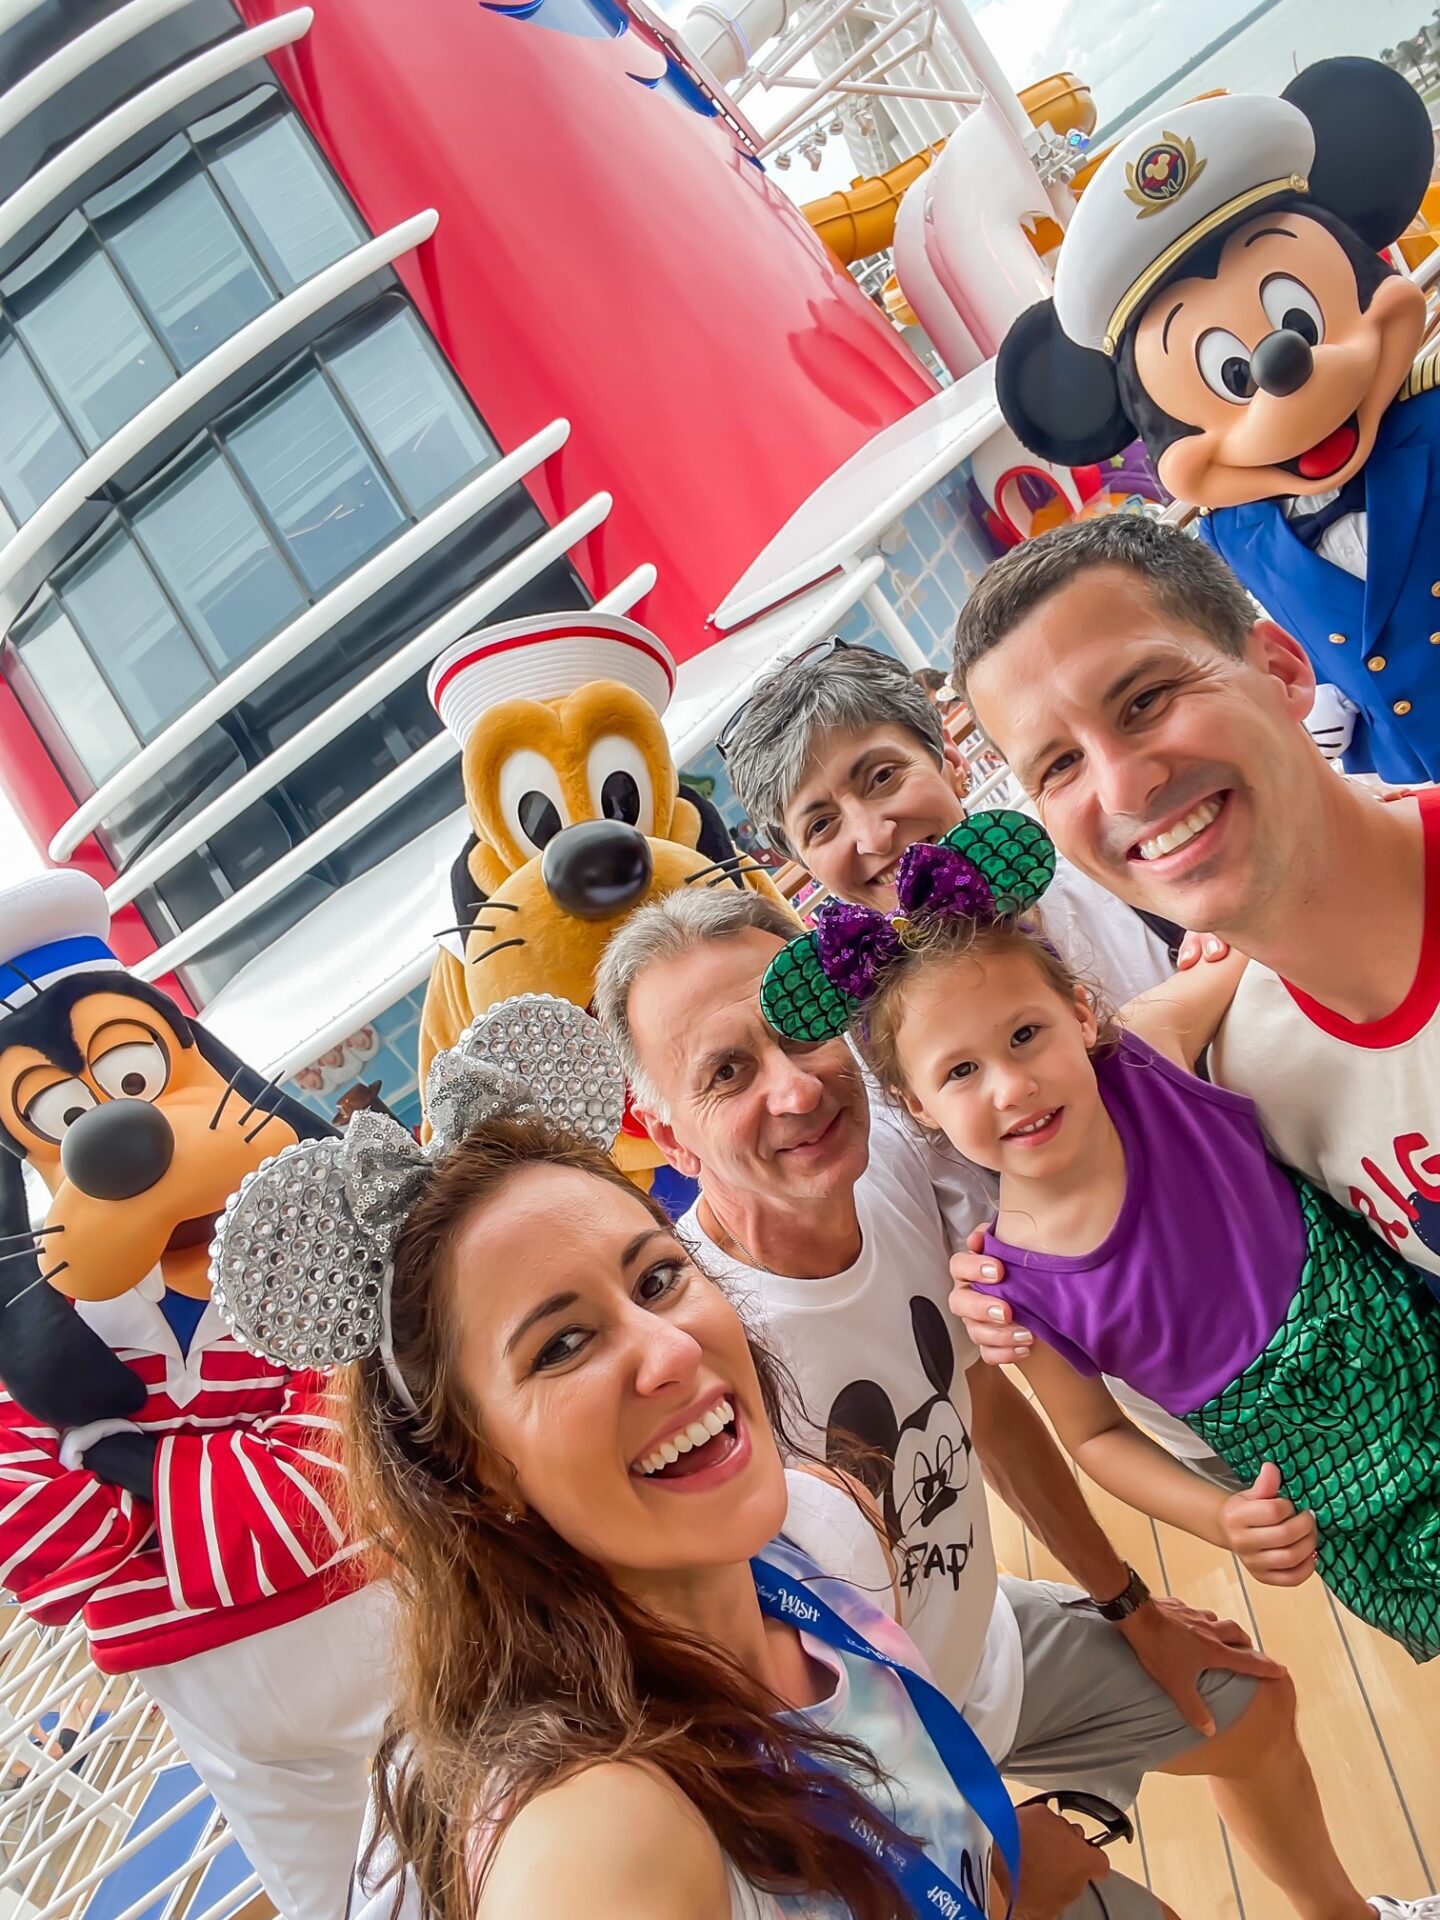 Our Inaugural Sail on the DISNEY WISH - its very first sailing! Full Disney Wish Cruise Review with insider tips and a photo diary!